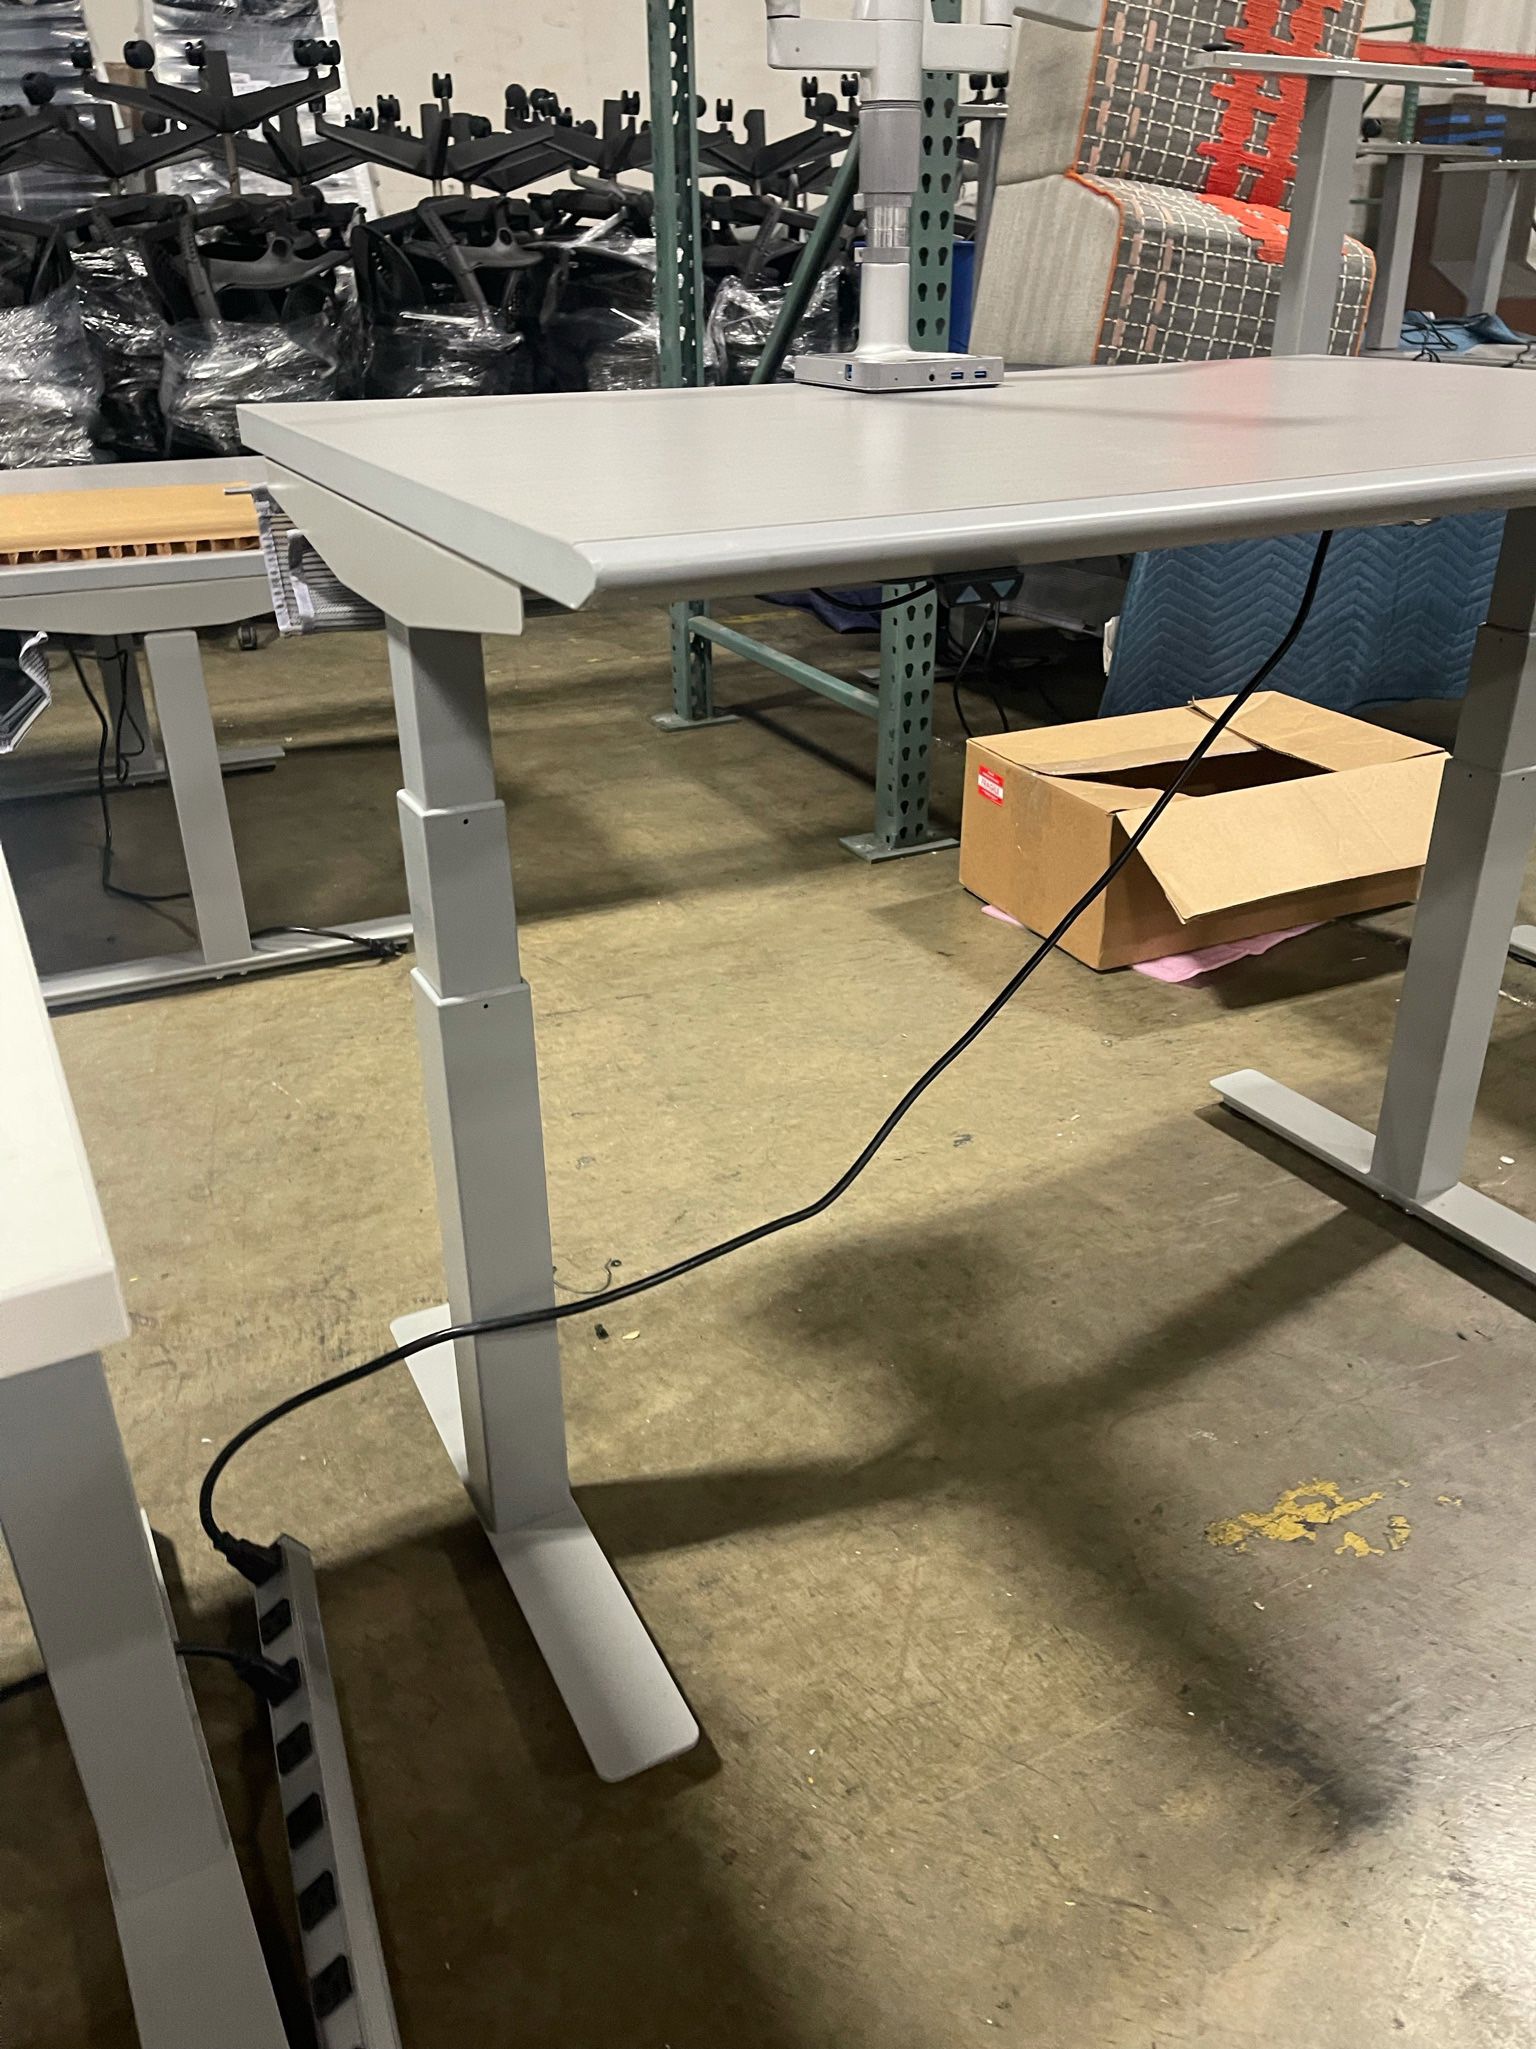 🚨AMQ Electric Height Adjustable Table !! Standing Desk!! 48x30 Gray Knife Edge🚨